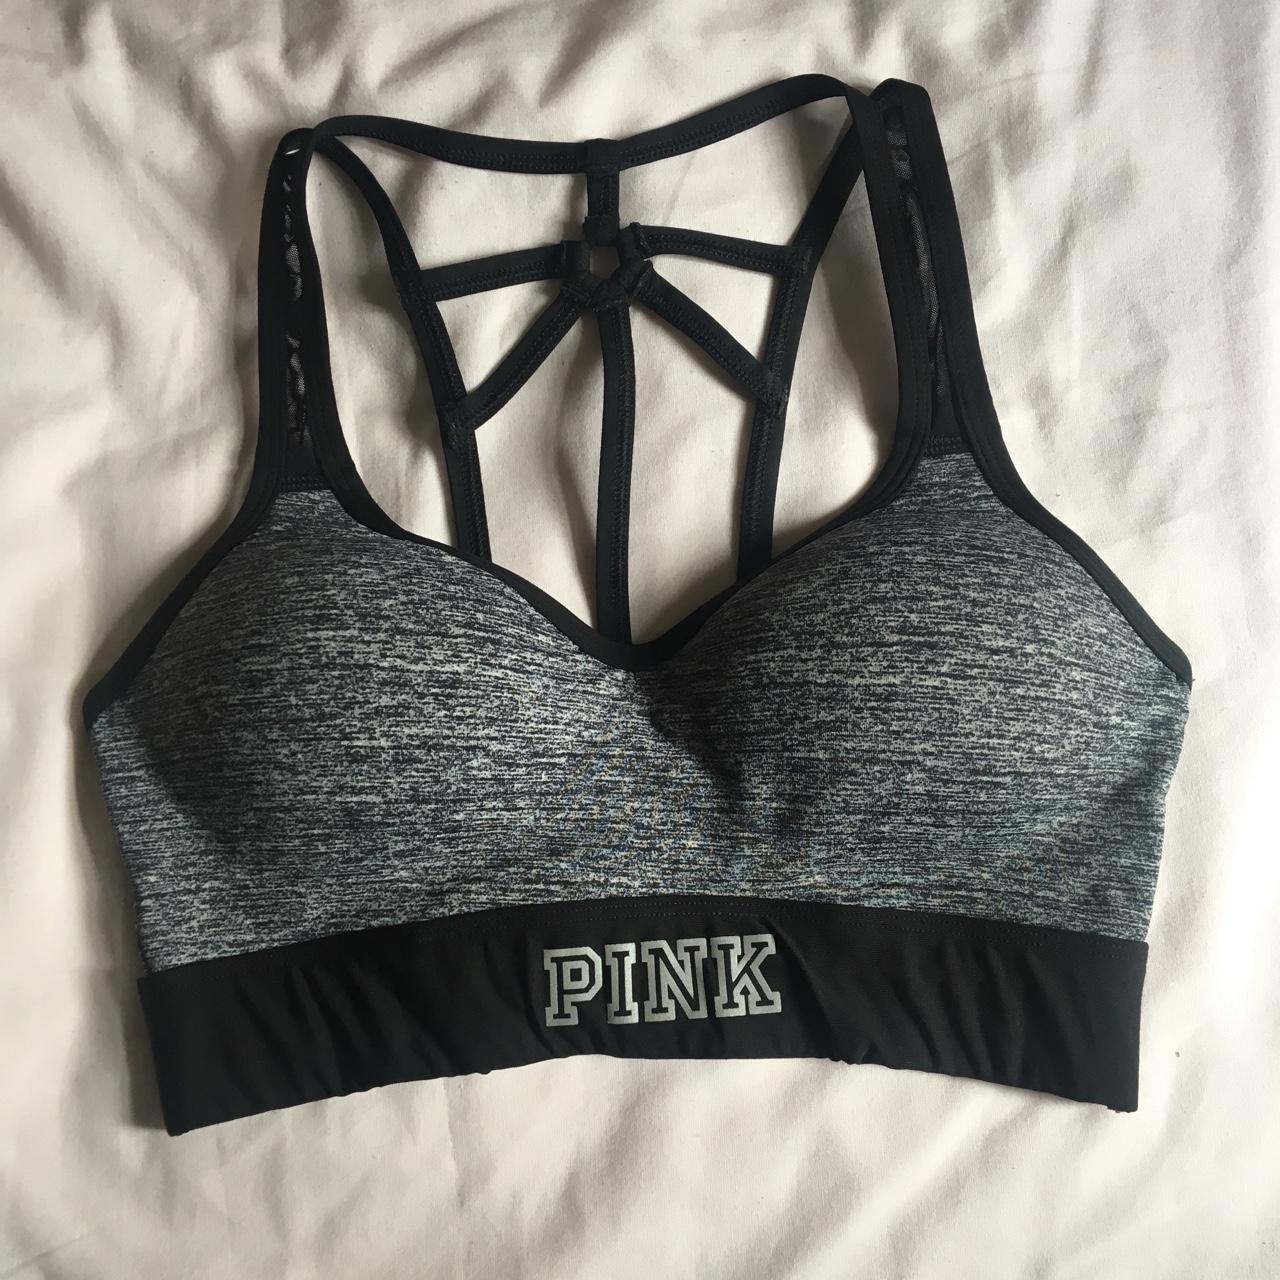 Pink Victoria Secret push up sports bra in grey and